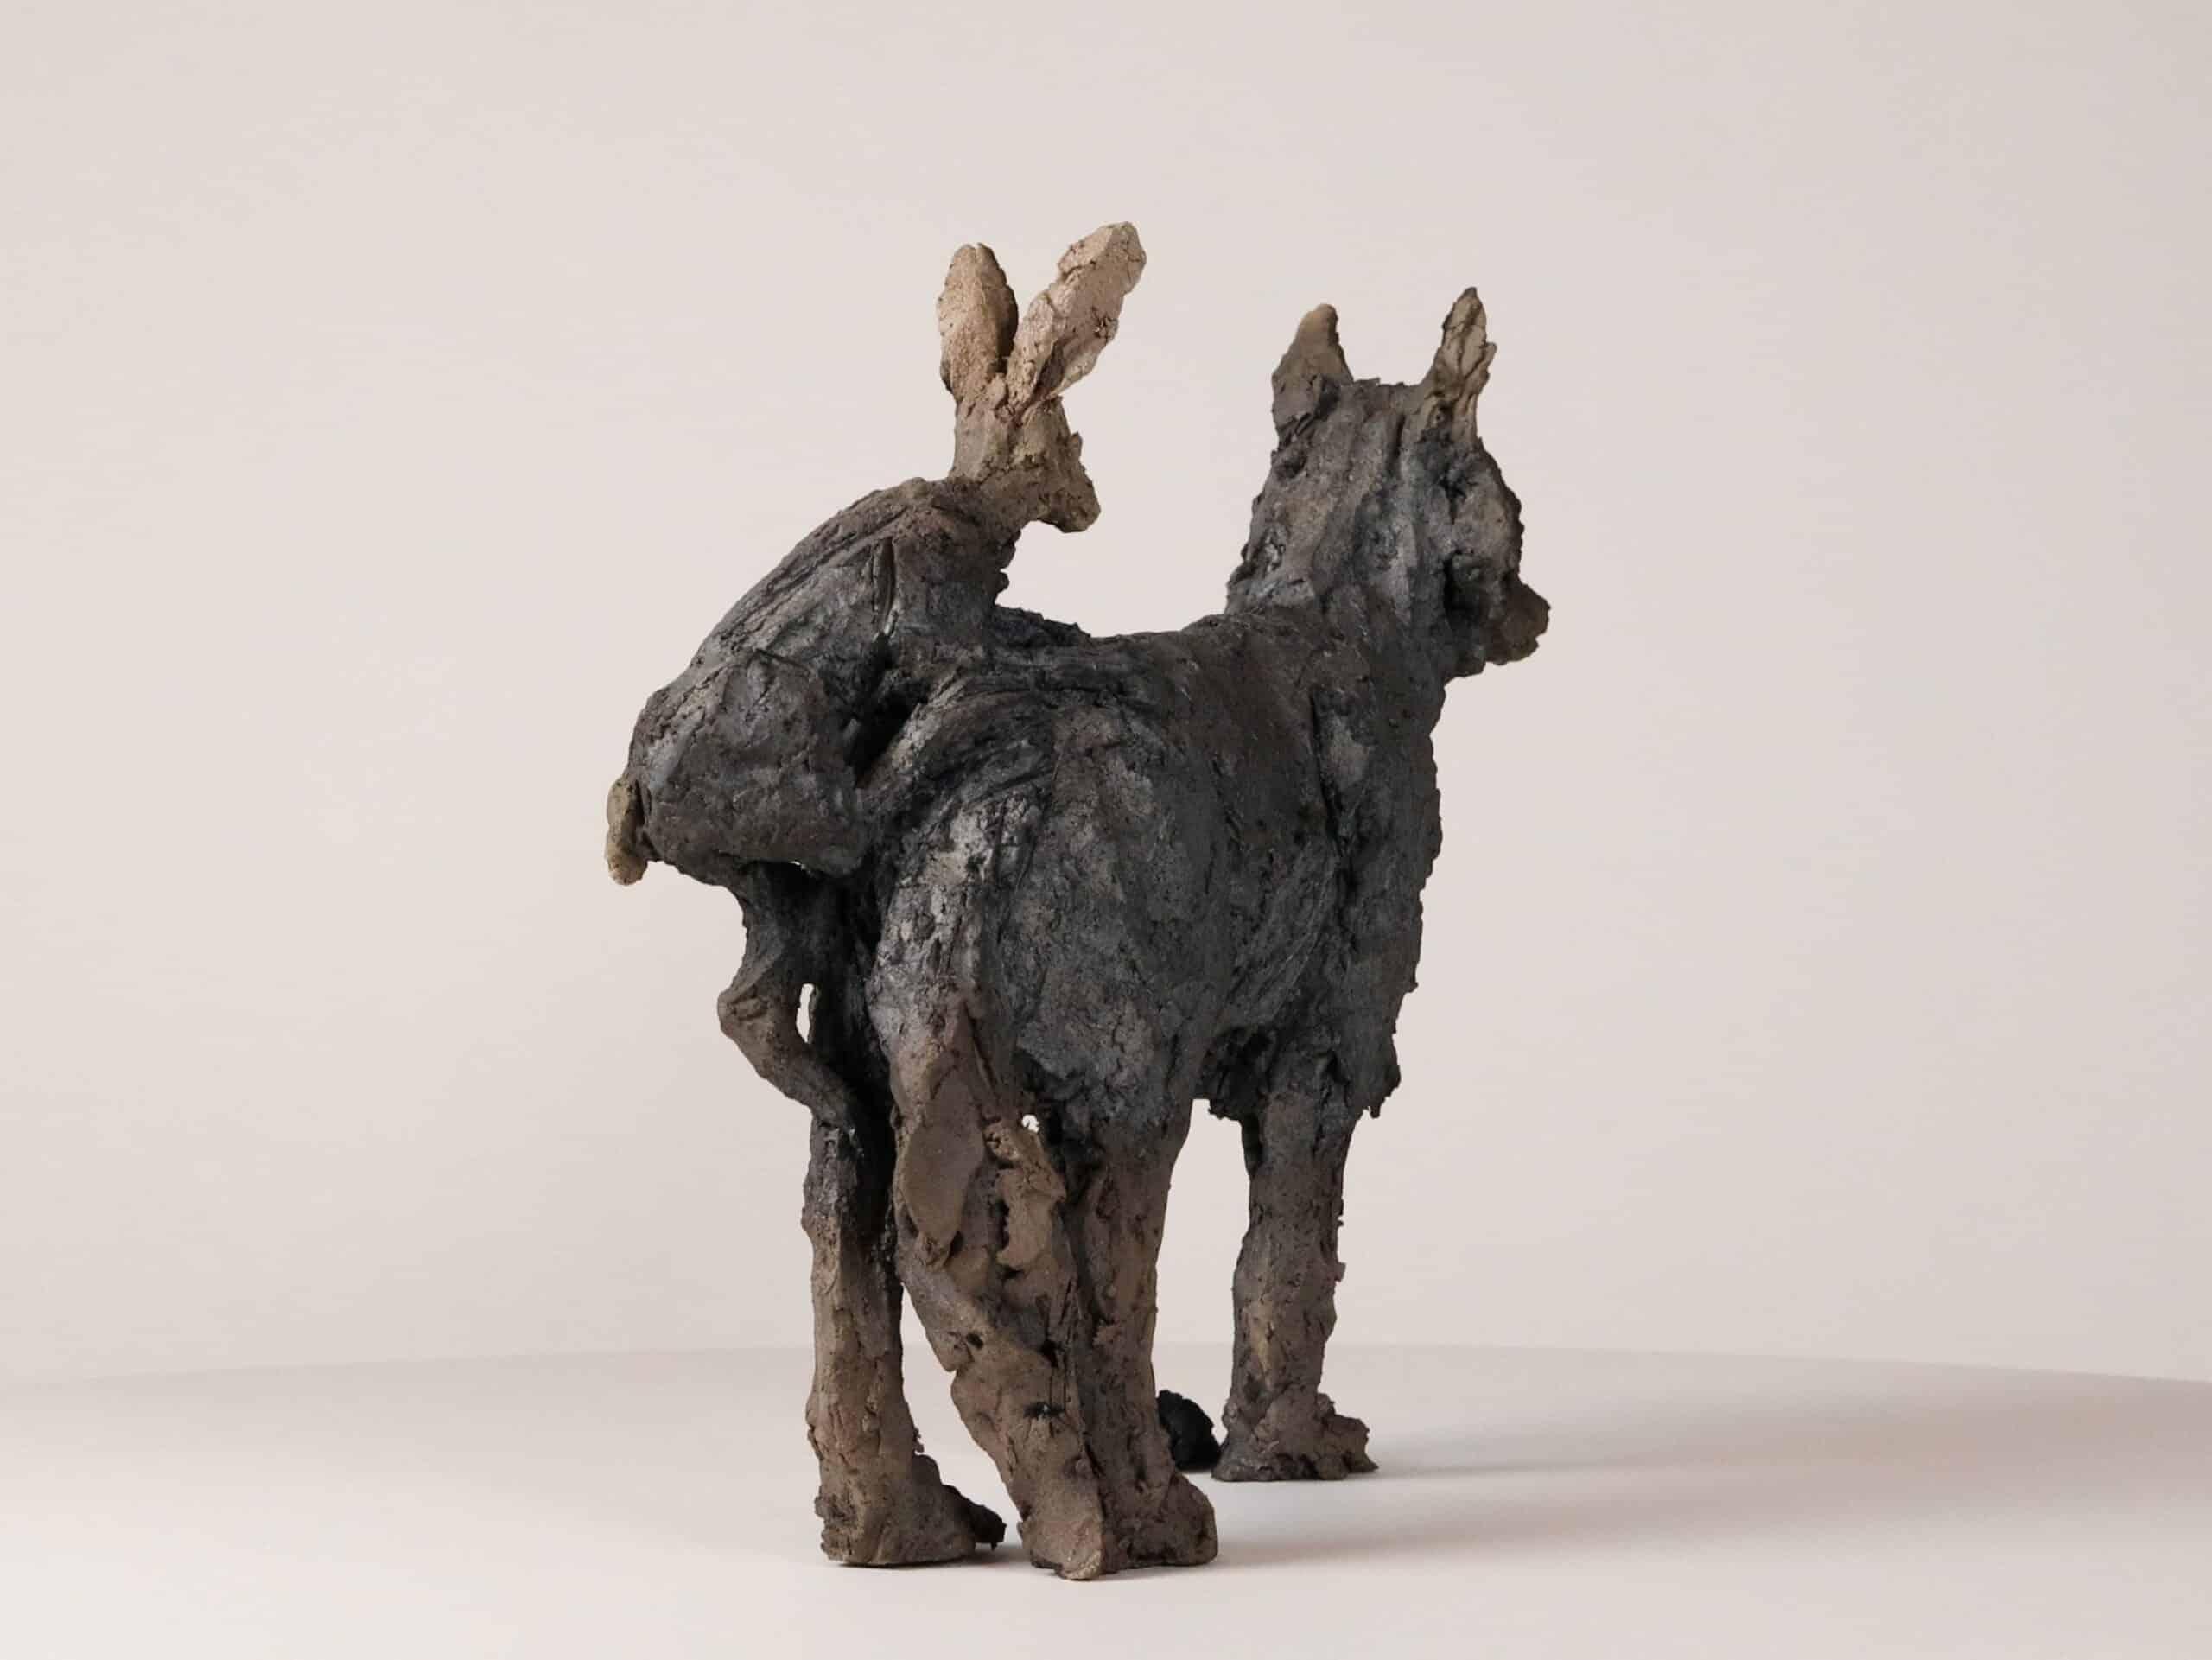 Hare and wolf is a unique smoke-fired sandstone sculpture by French contemporary artist Cécile Raynal, dimensions are 33 × 42 × 16 cm (13 × 16.5 × 6.3 in). 

The sculpture depicts an ironic scene: a hare is being attacked by a wolf, but the wolf is